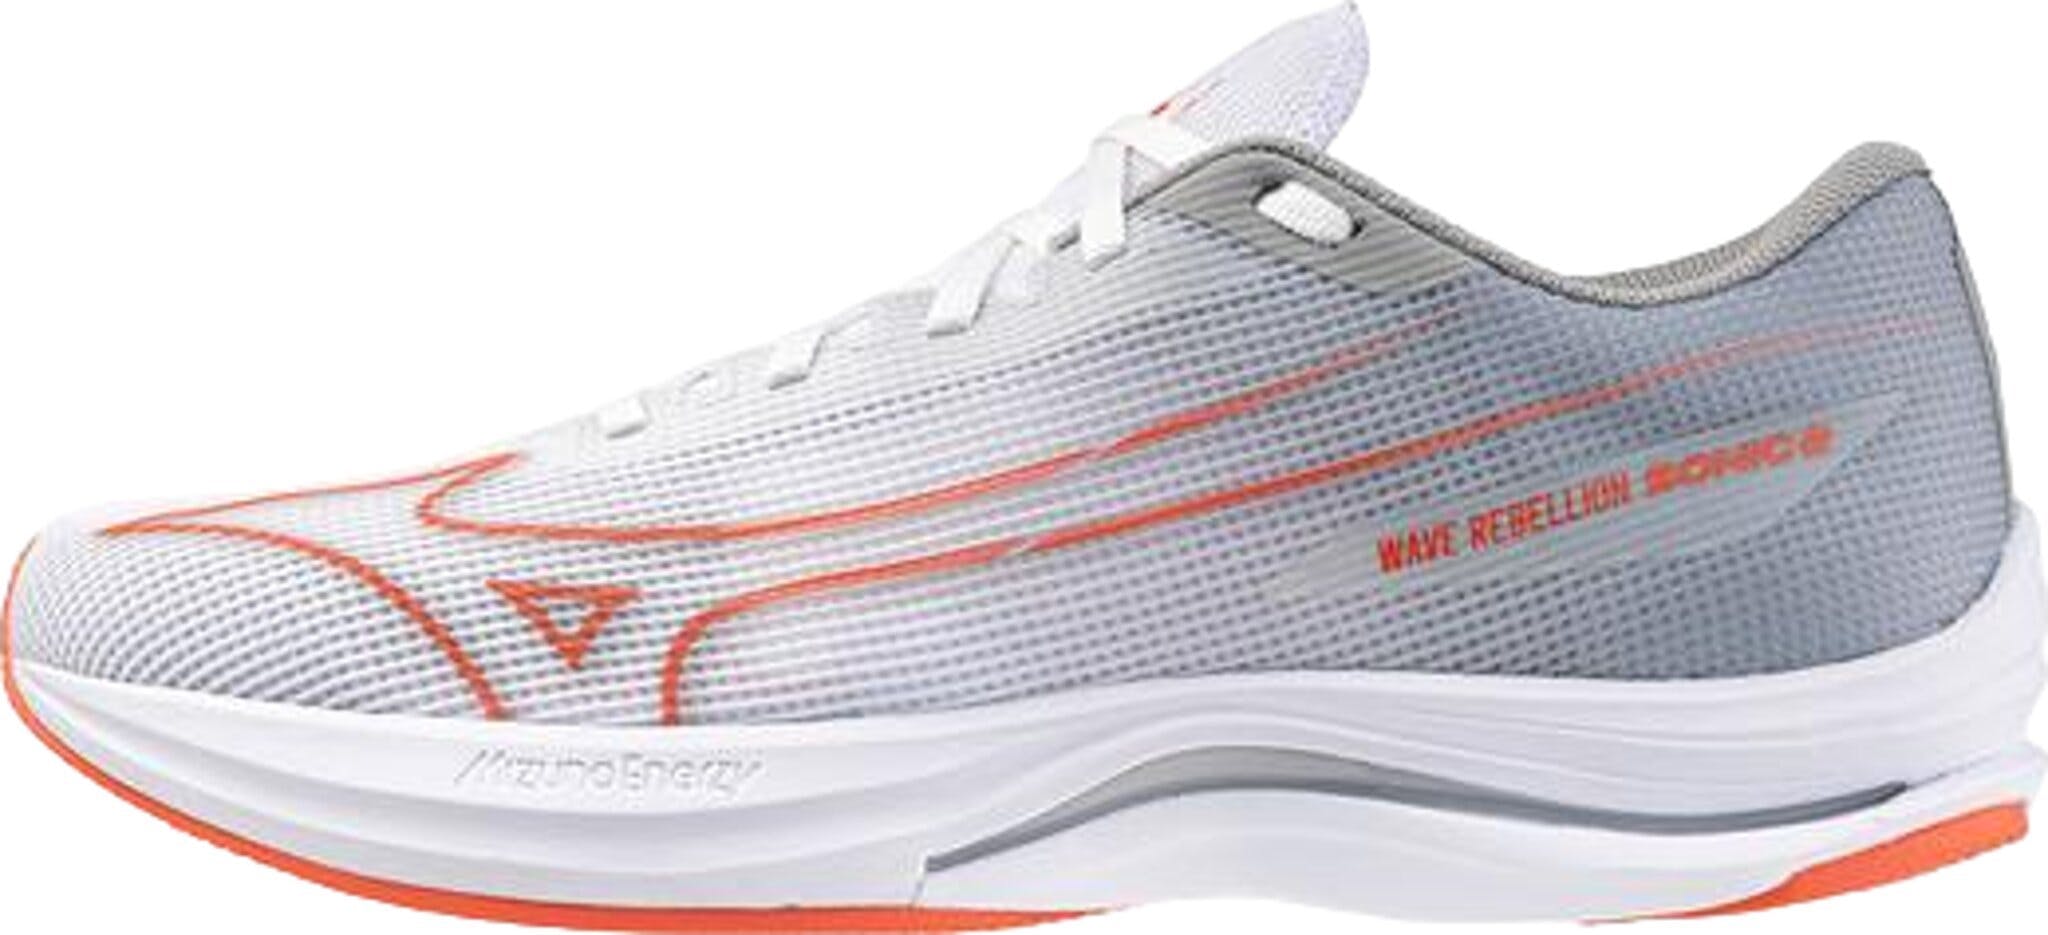 Product image for Wave Rebellion Sonic 2 Running Shoes - Men's